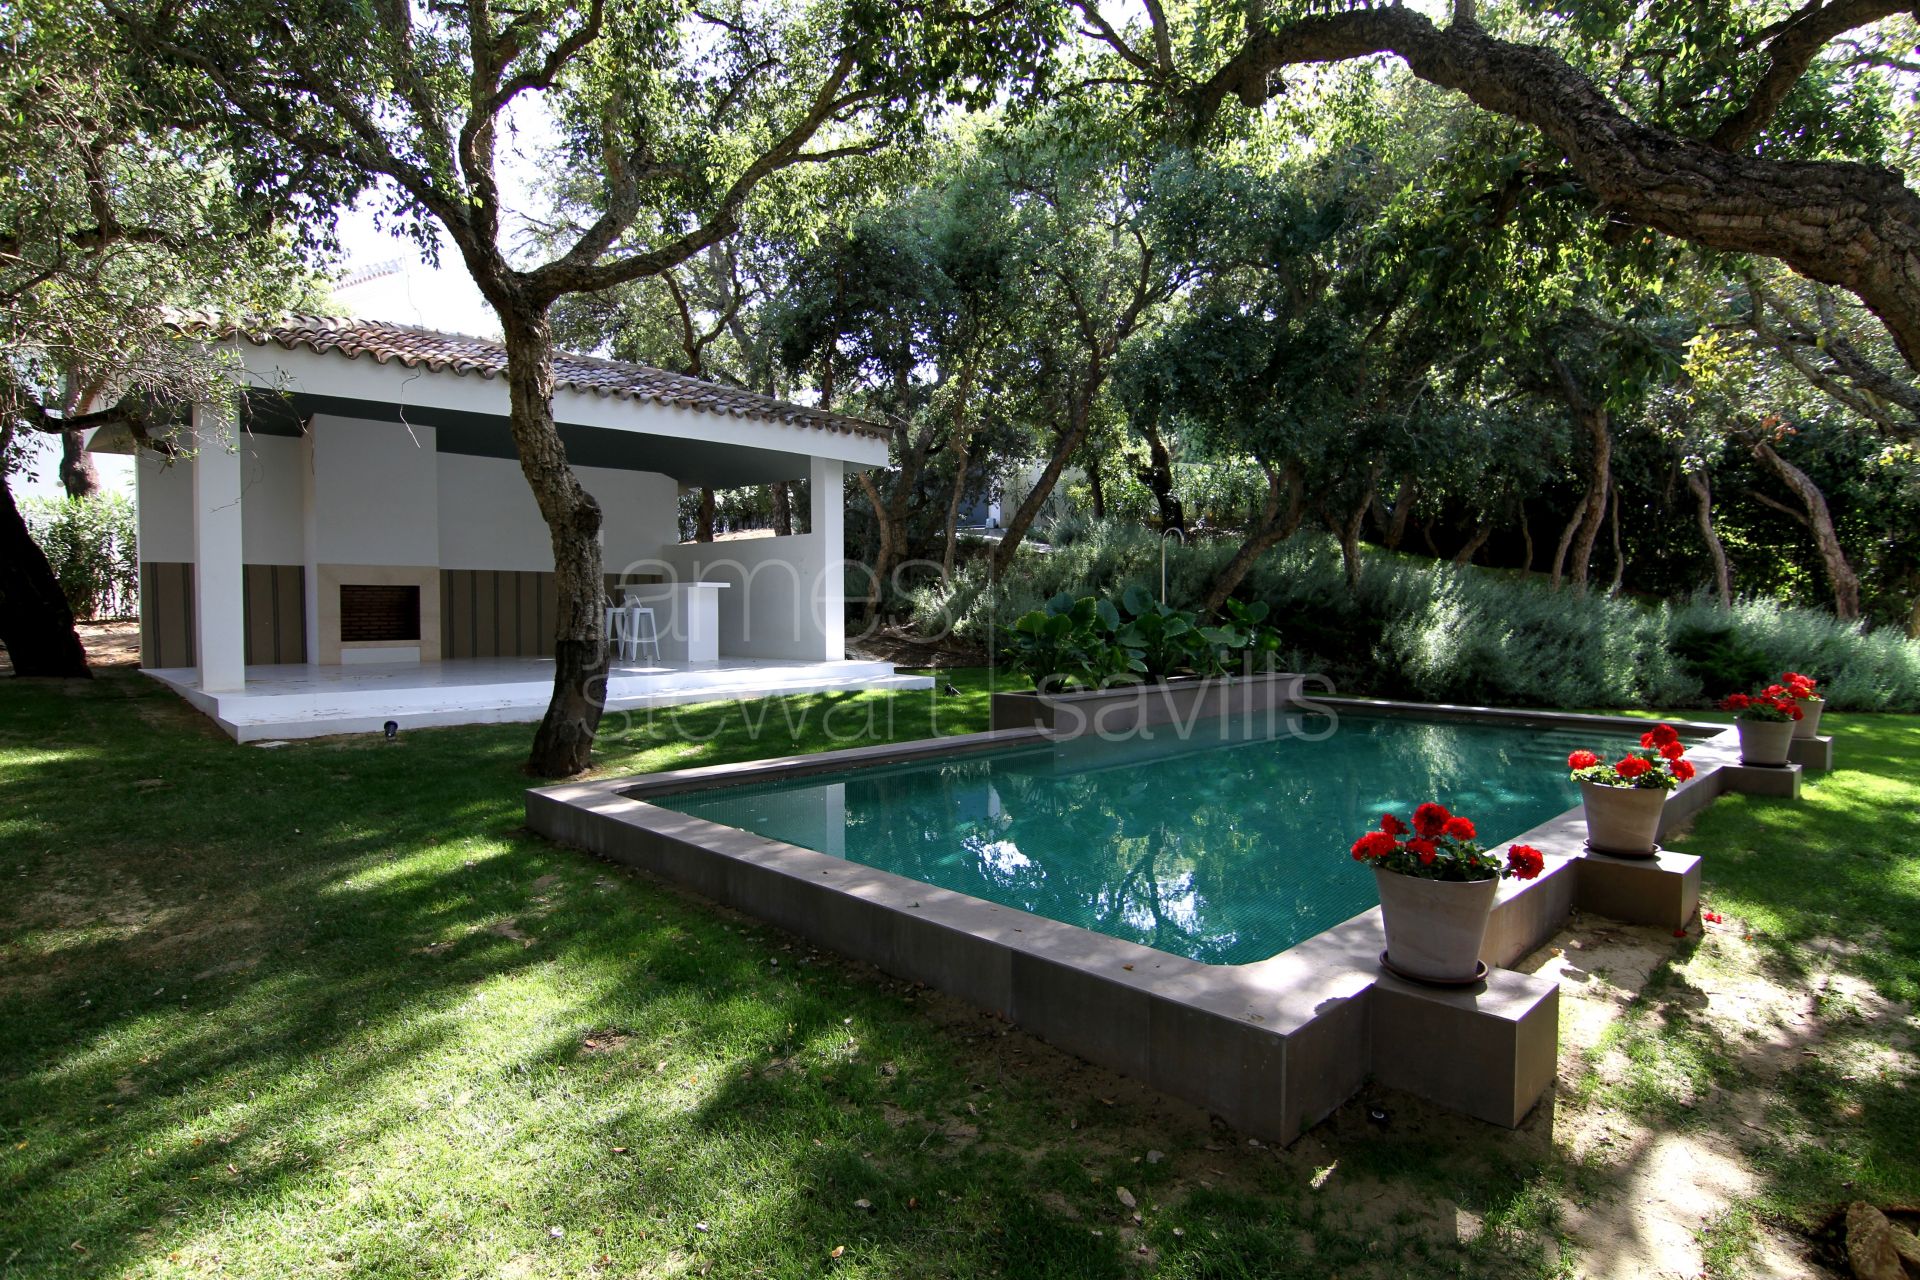 Luxury and tranquility in a secure gated location within Sotogrande